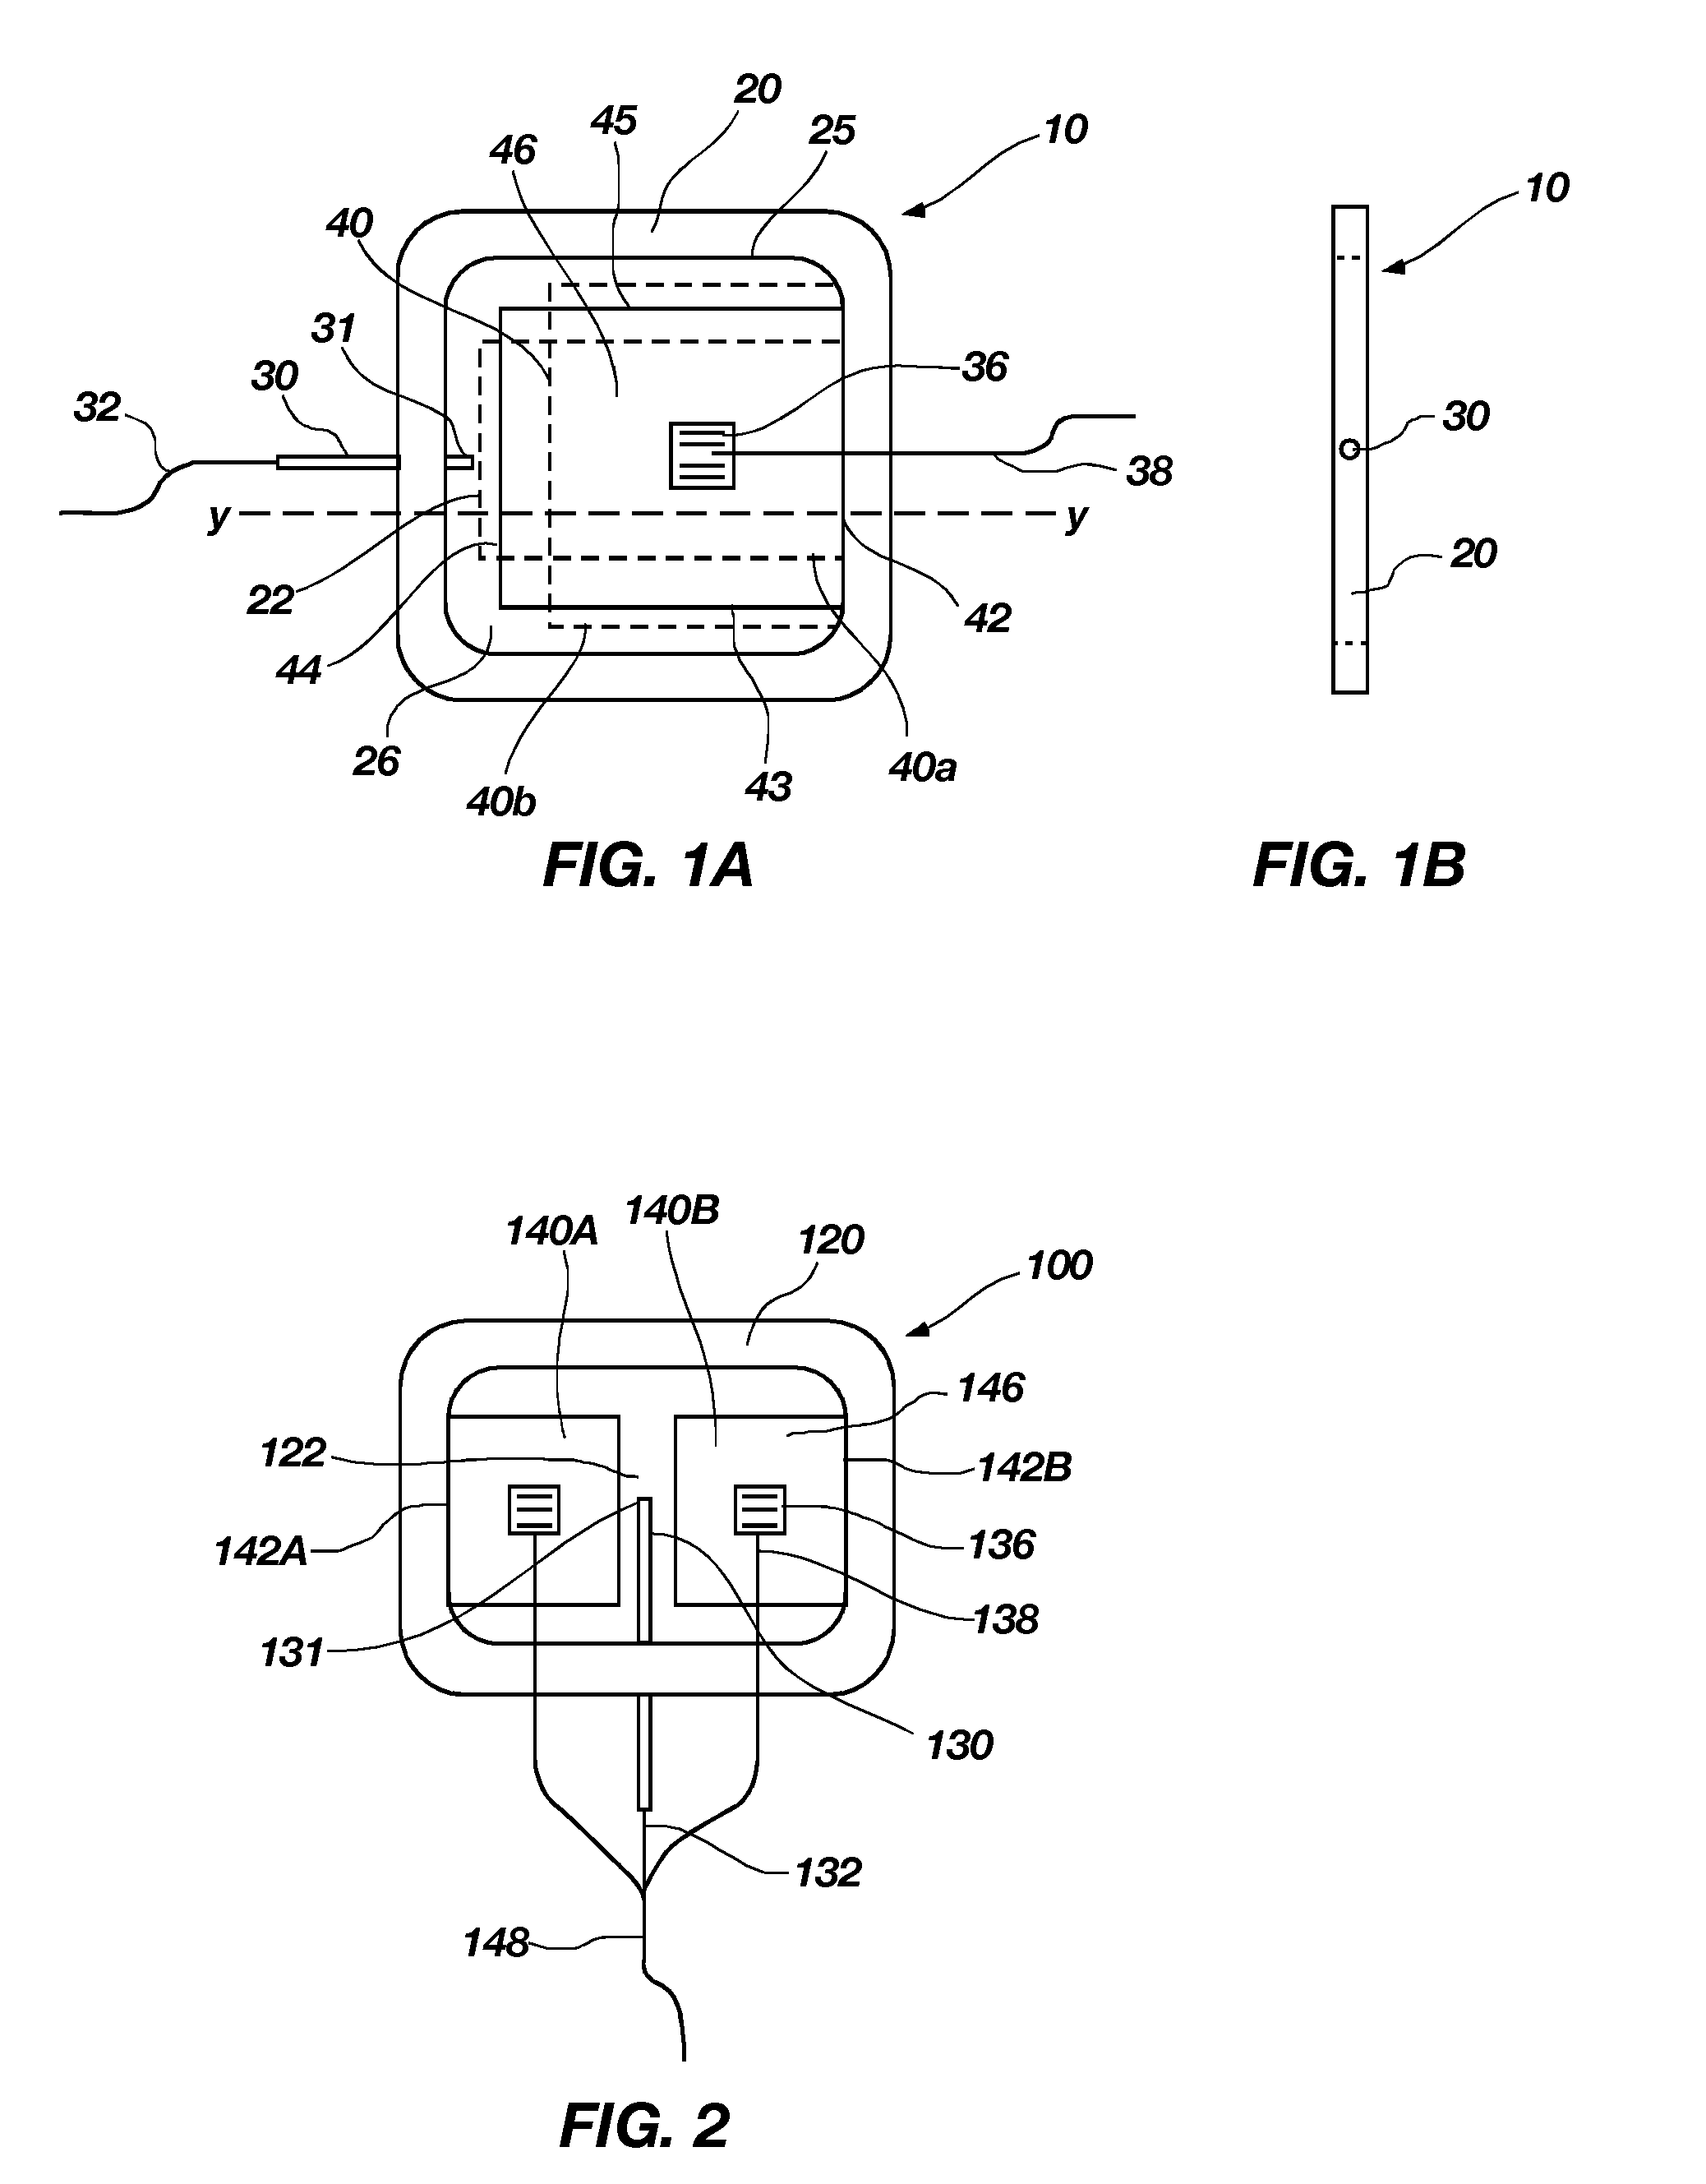 Relaxation modulus sensor, structure incorporating same, and method for use of same